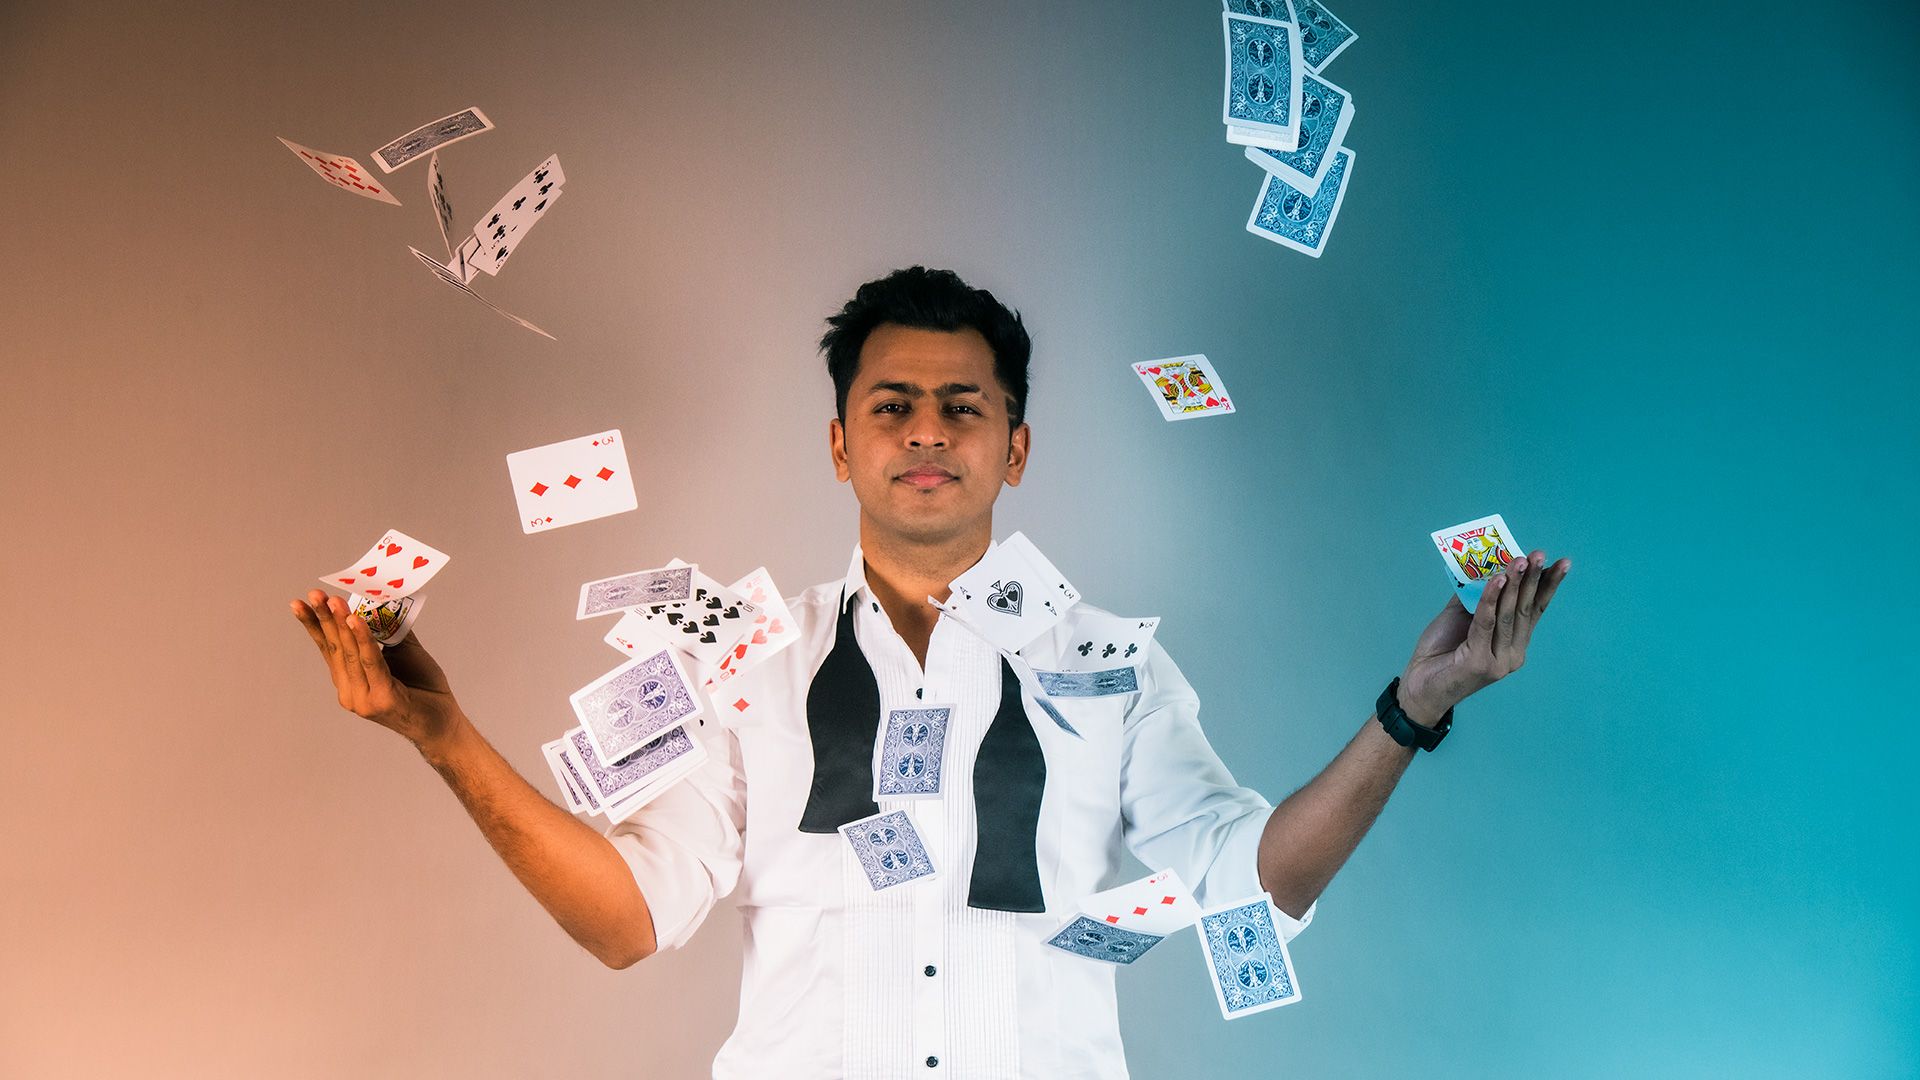 Sushil Jaiswal: Top magician with Guinness Book of World Record dazzling his fans the art of magic – Entrepenuer Stories